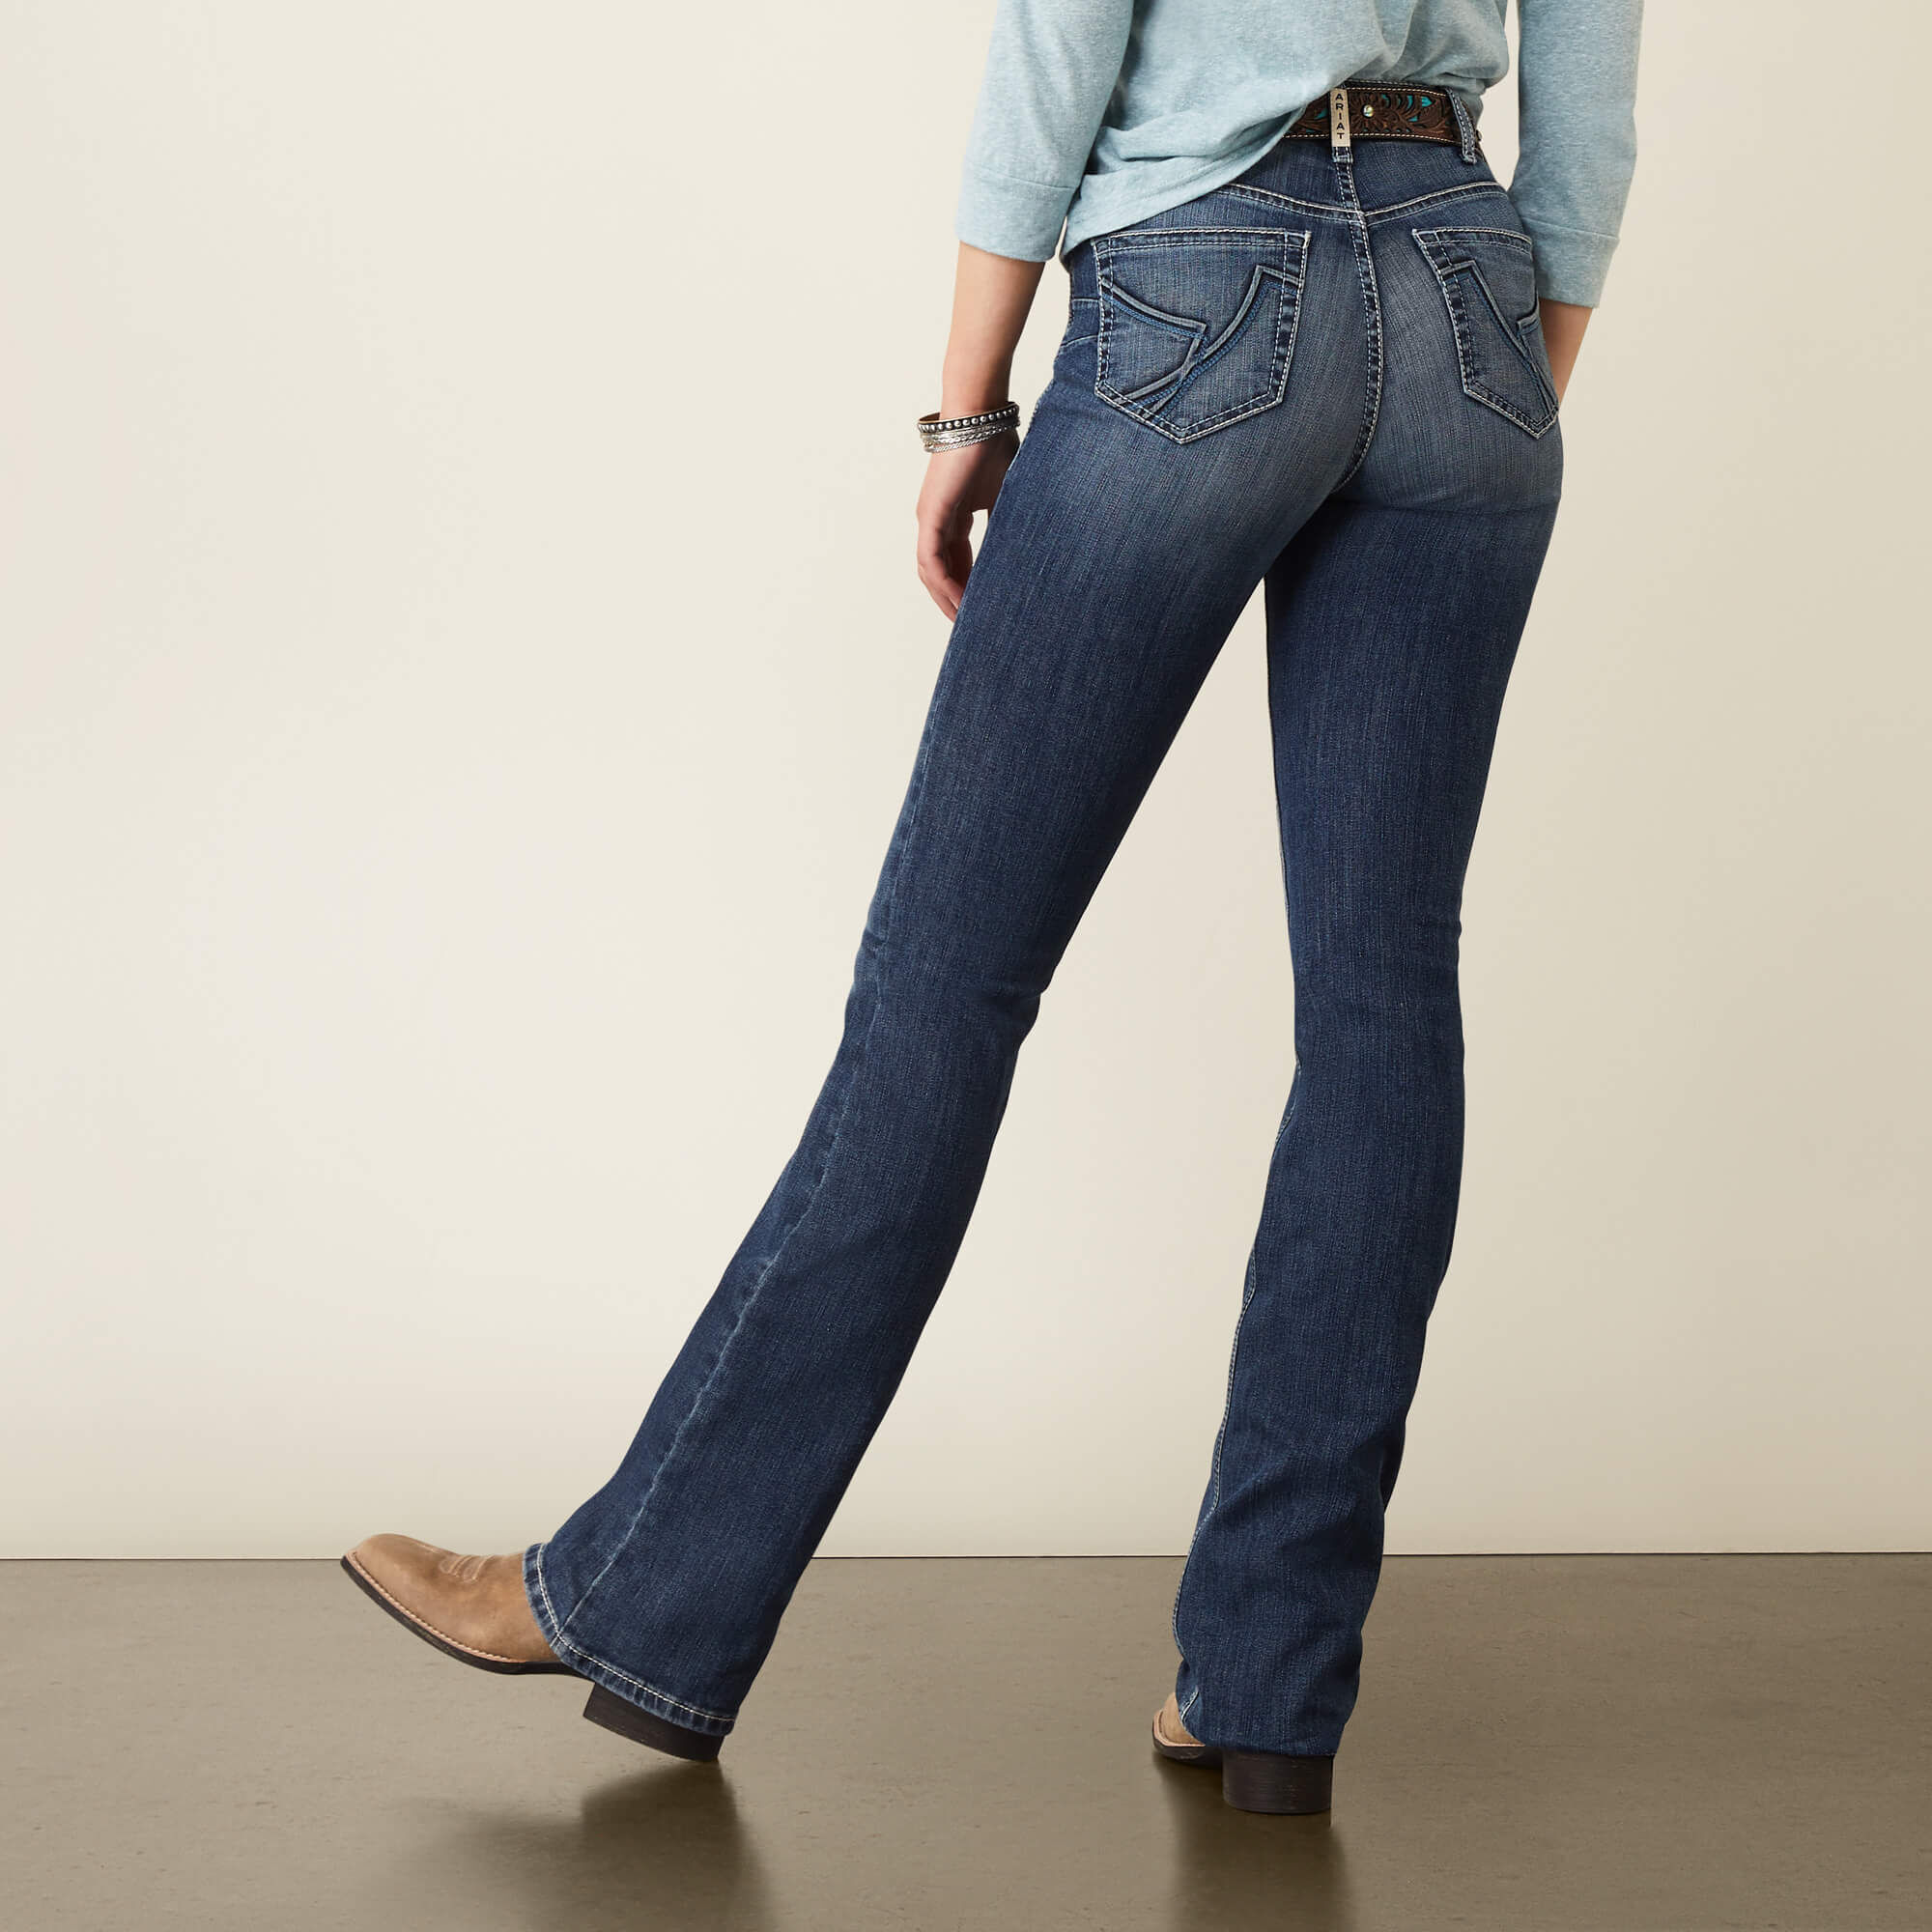 High Rise Bombshell Boot Cut Jean at Seven7 Jeans